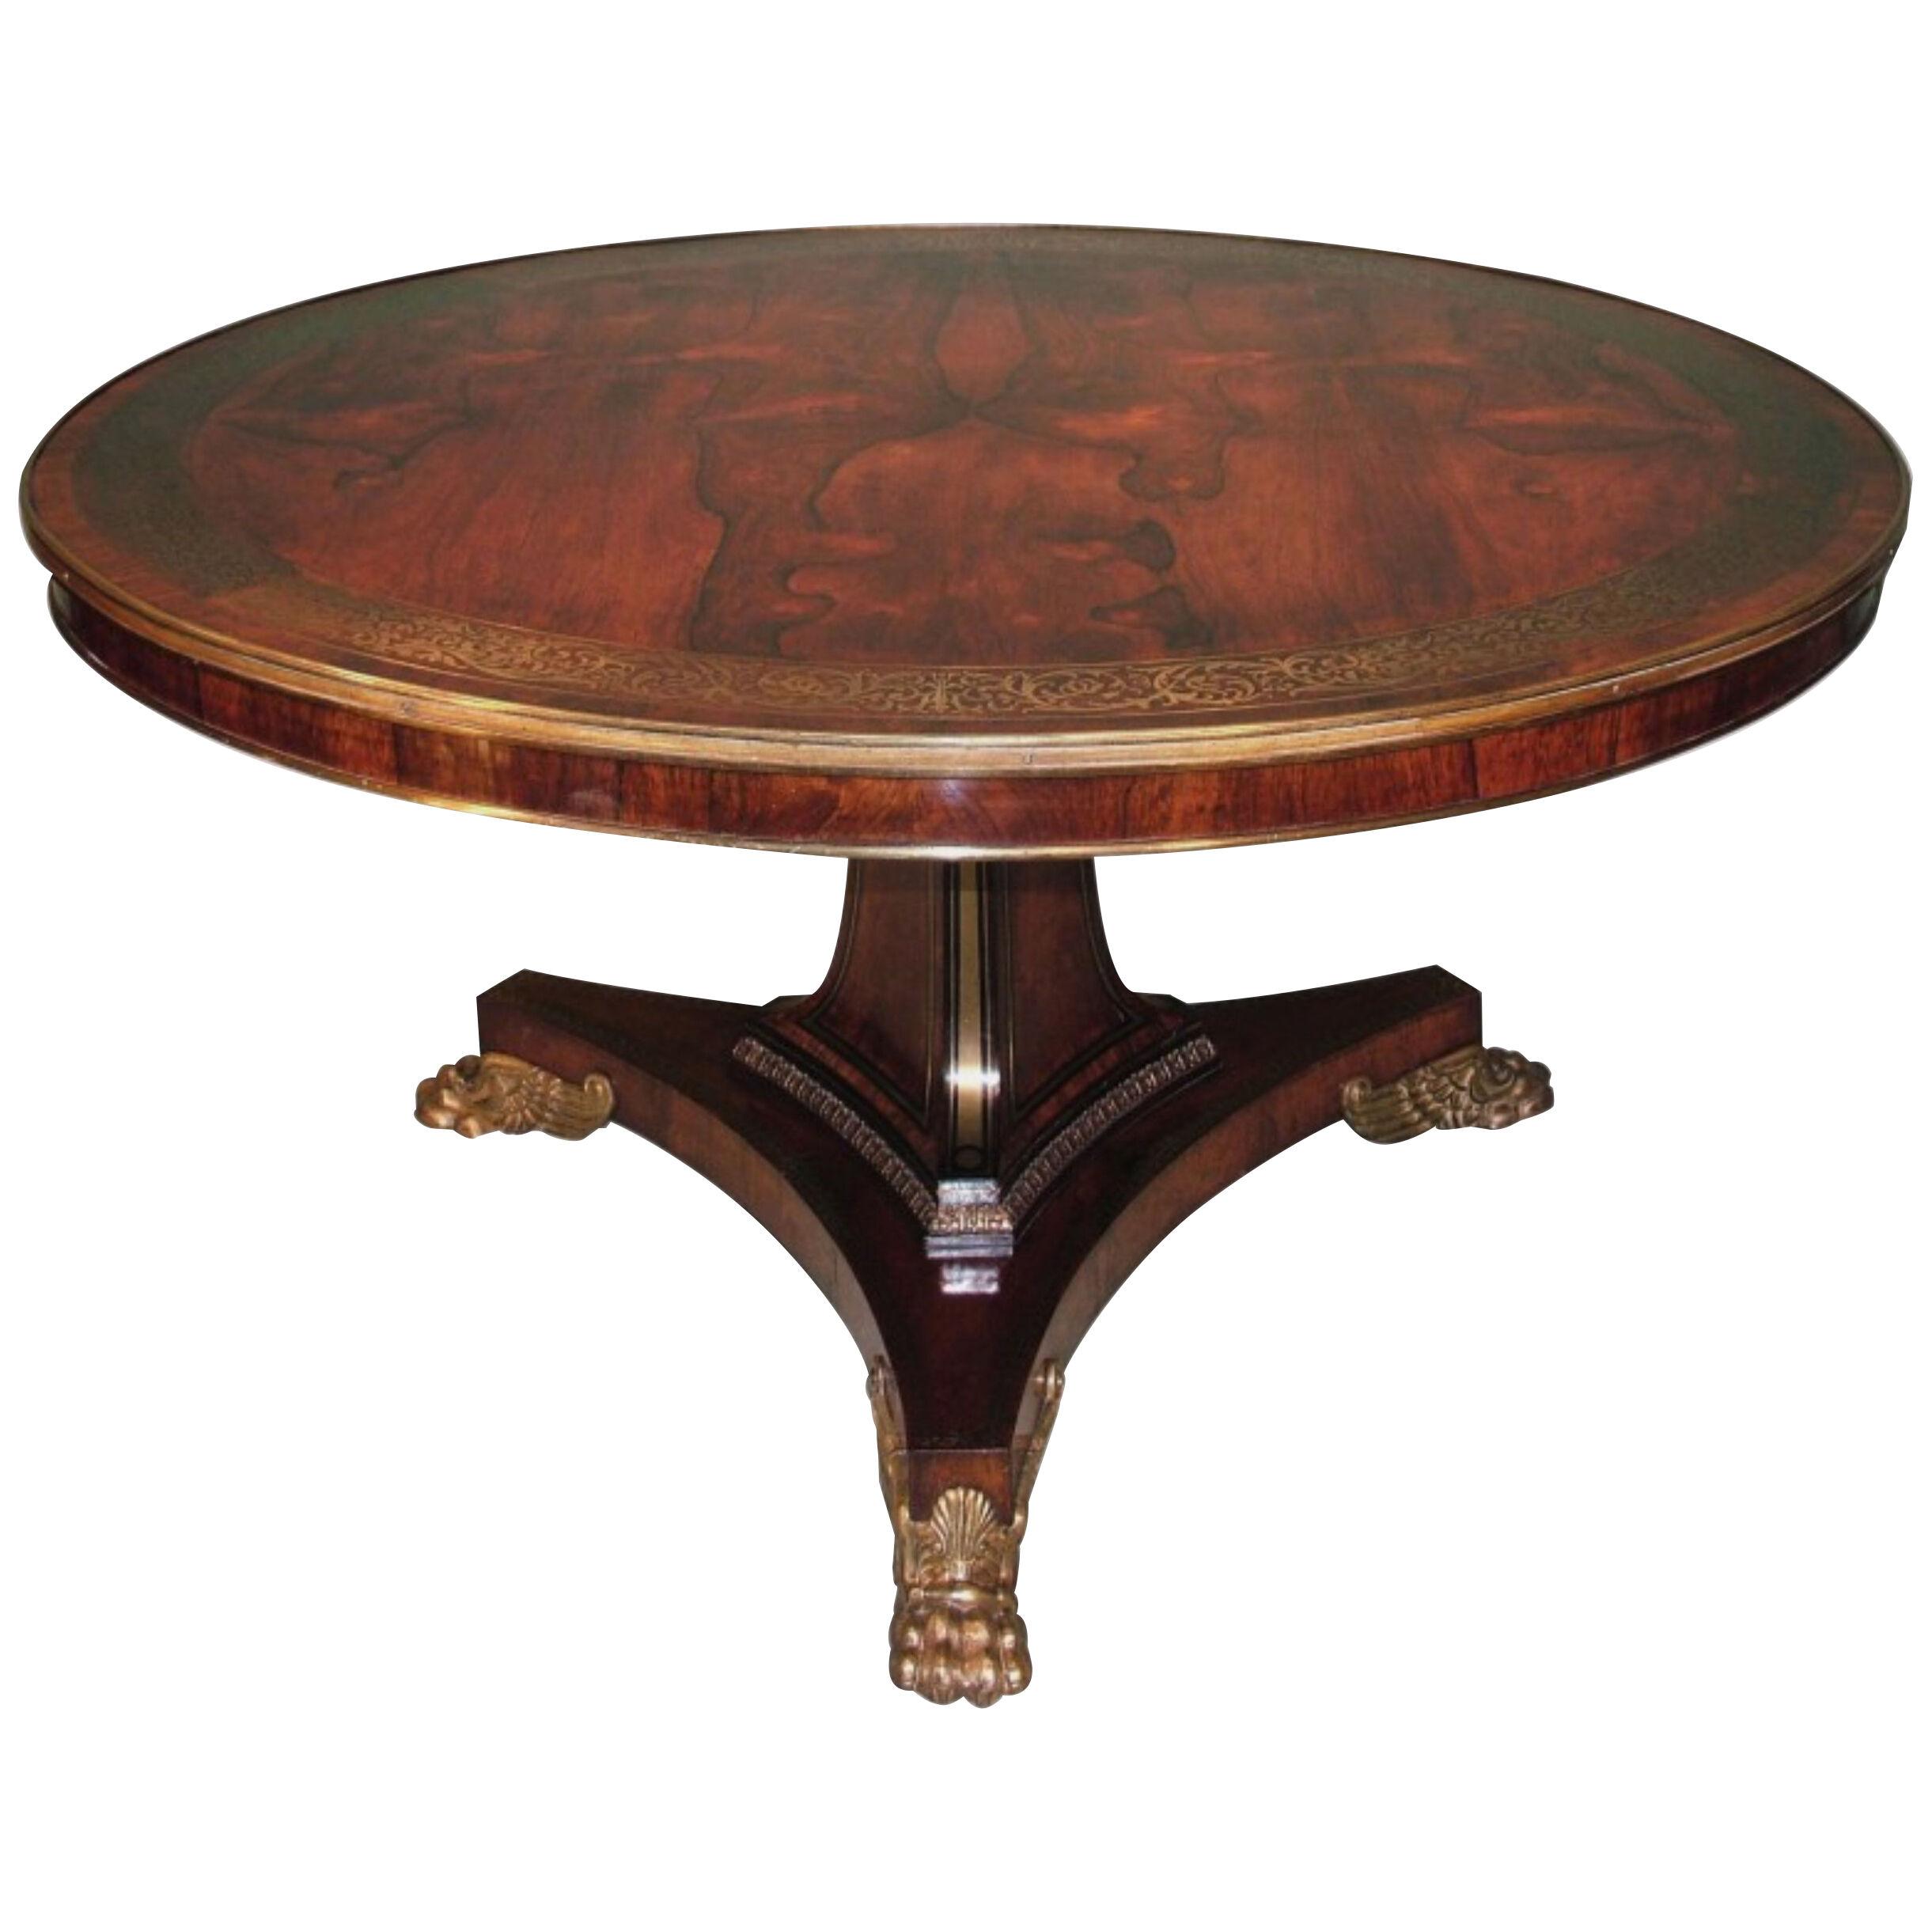 Antique 19th Century rosewood and brass inlaid Centre Table.